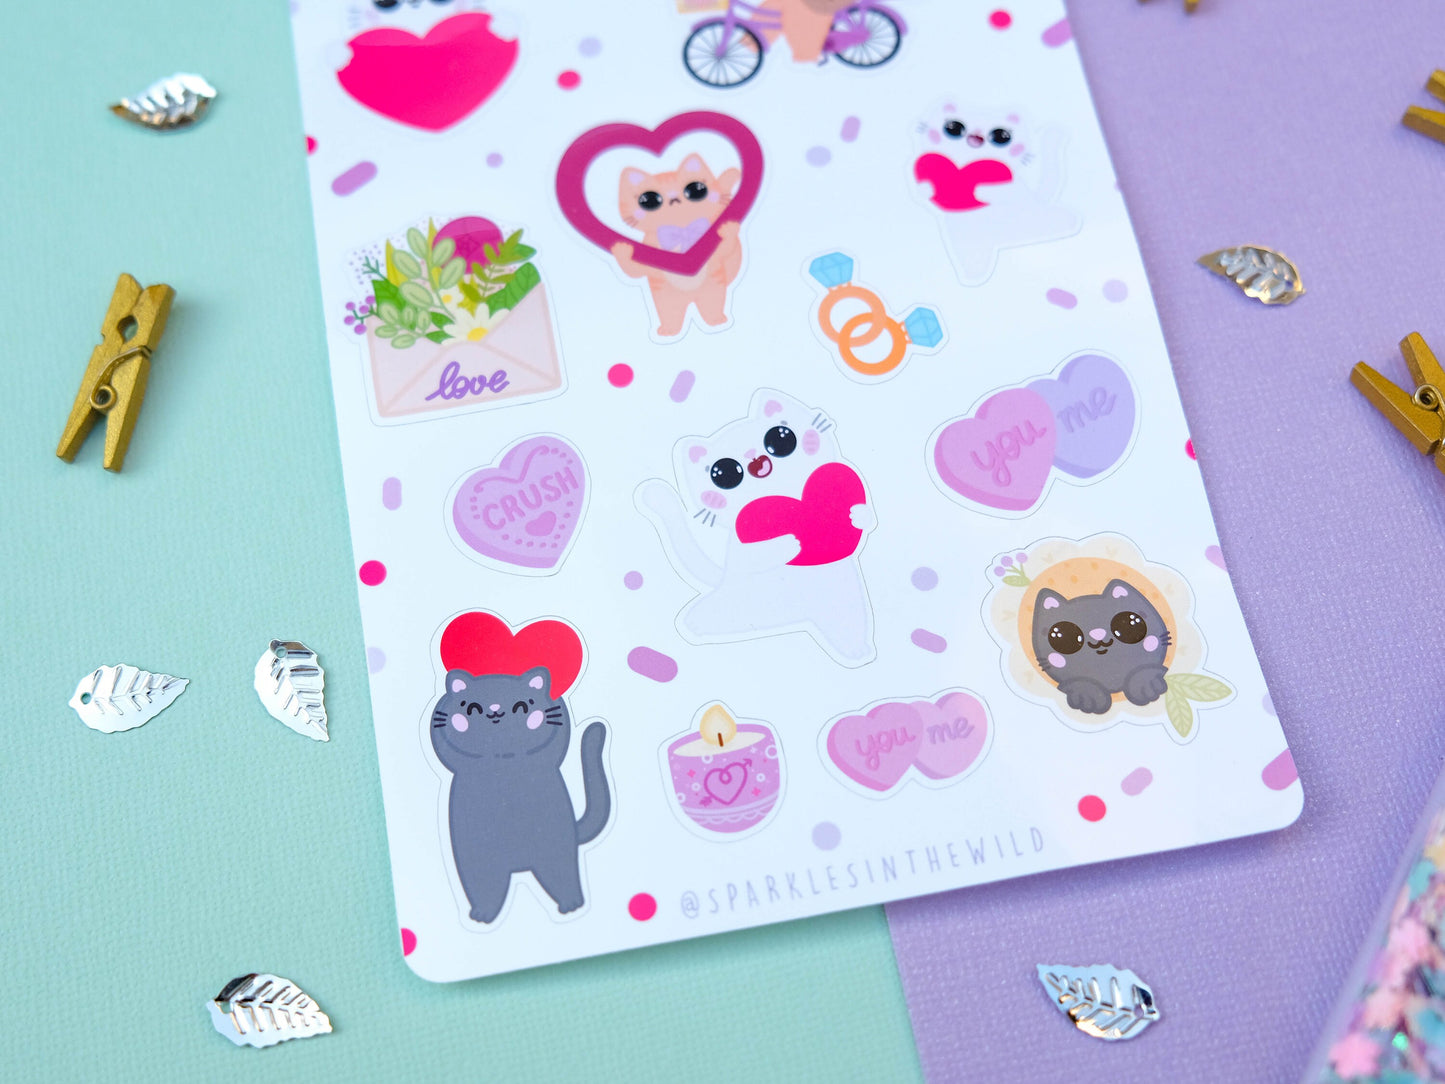 Sticker sheet water resistant Love and Hearts - Sticker Sheet Love is Loe with cats - Planner Stickers - Set of Sticker for Bullet Journal